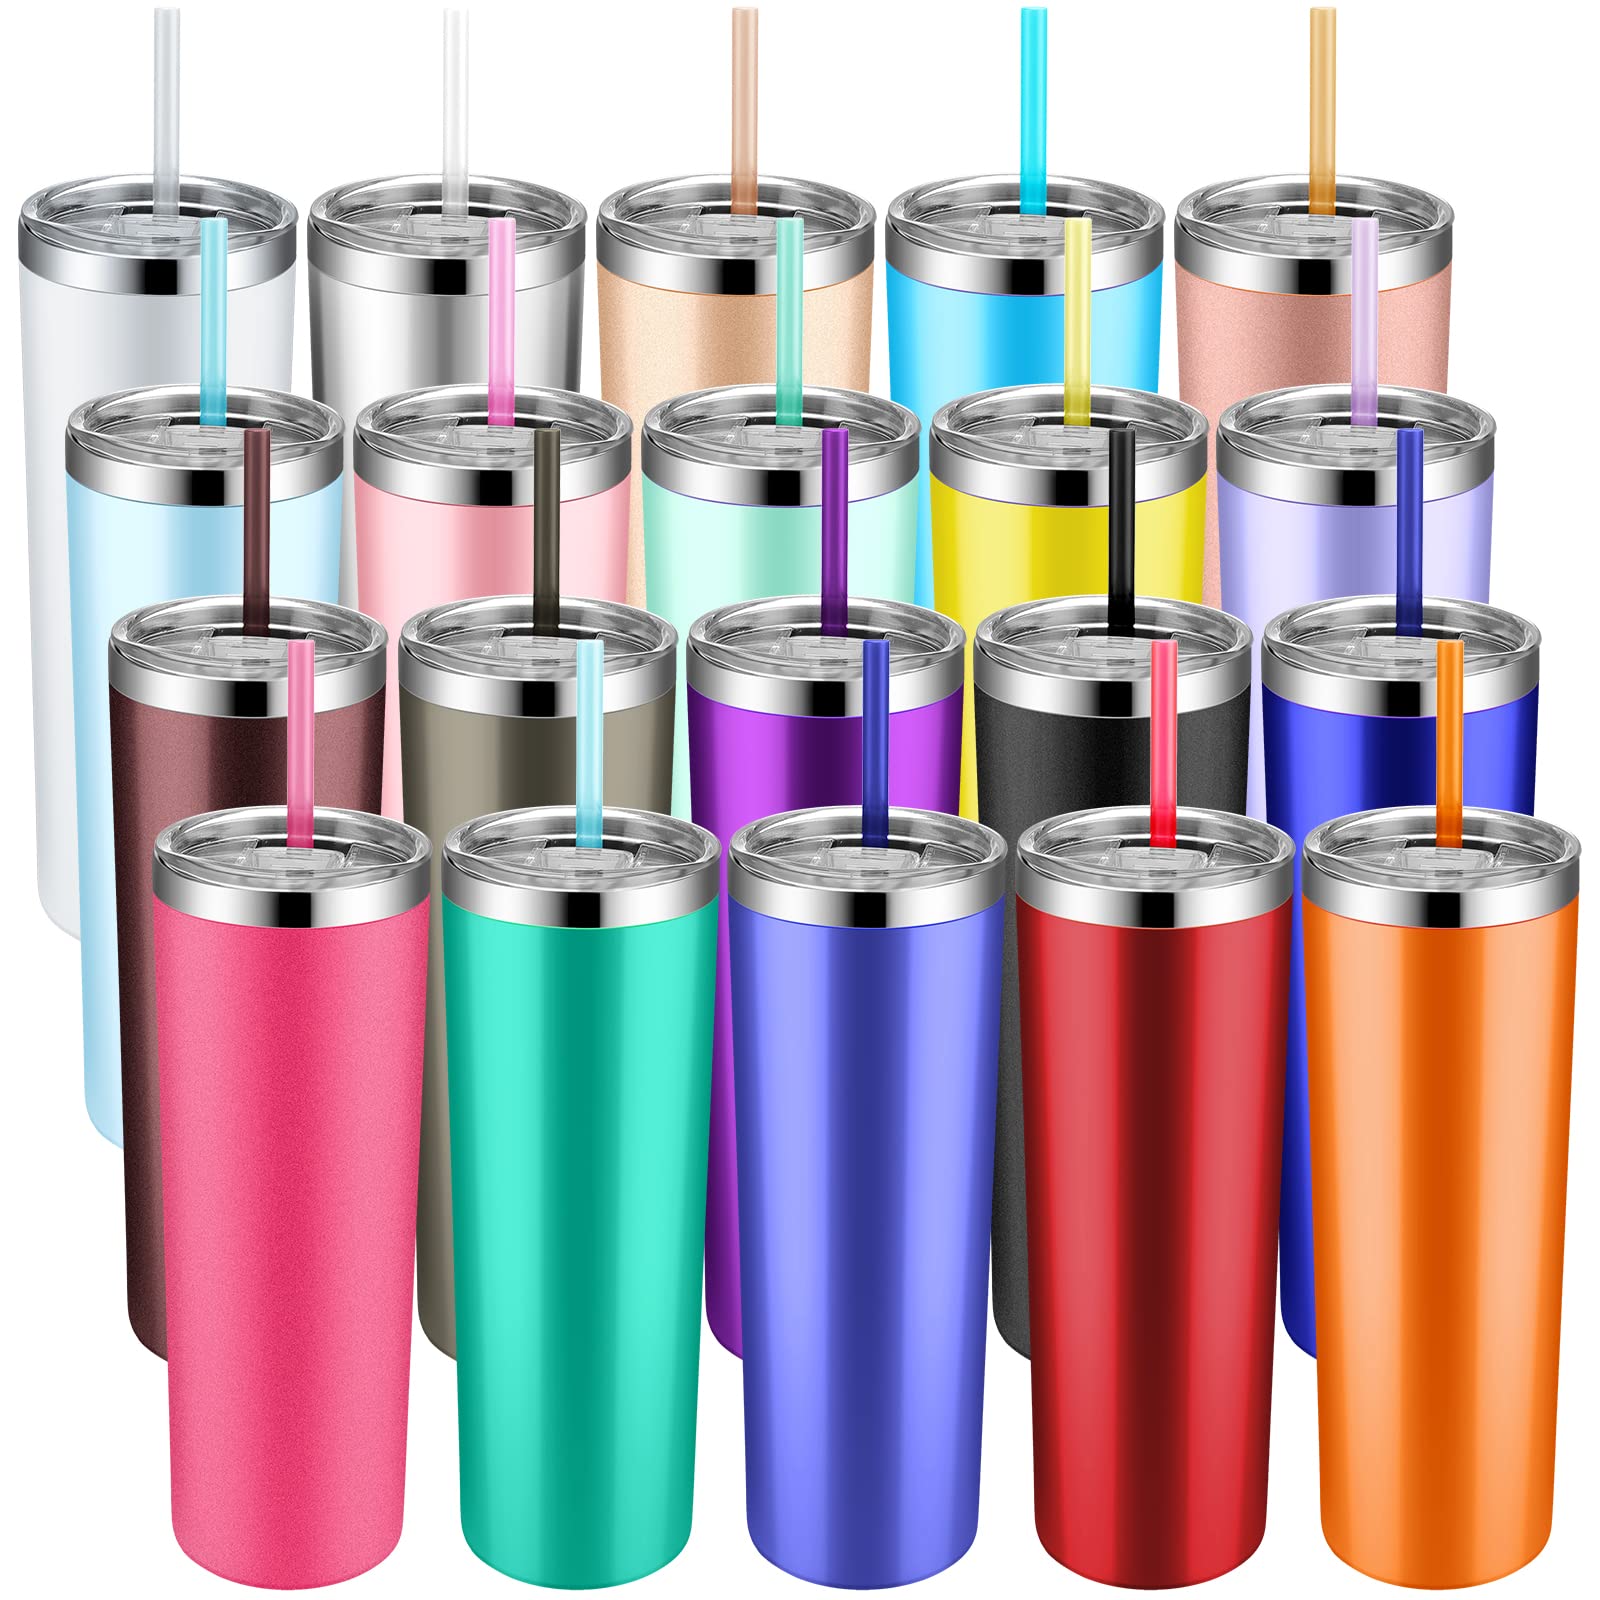 20 Pack 20 oz Stainless Steel Tumbler Set with Straws and Lids Double Wall Vacuum Insulated Travel Cup Colorful Skinny Coffee Tumbler Water Tumbler for Coffee Water Hot Cold Drinks